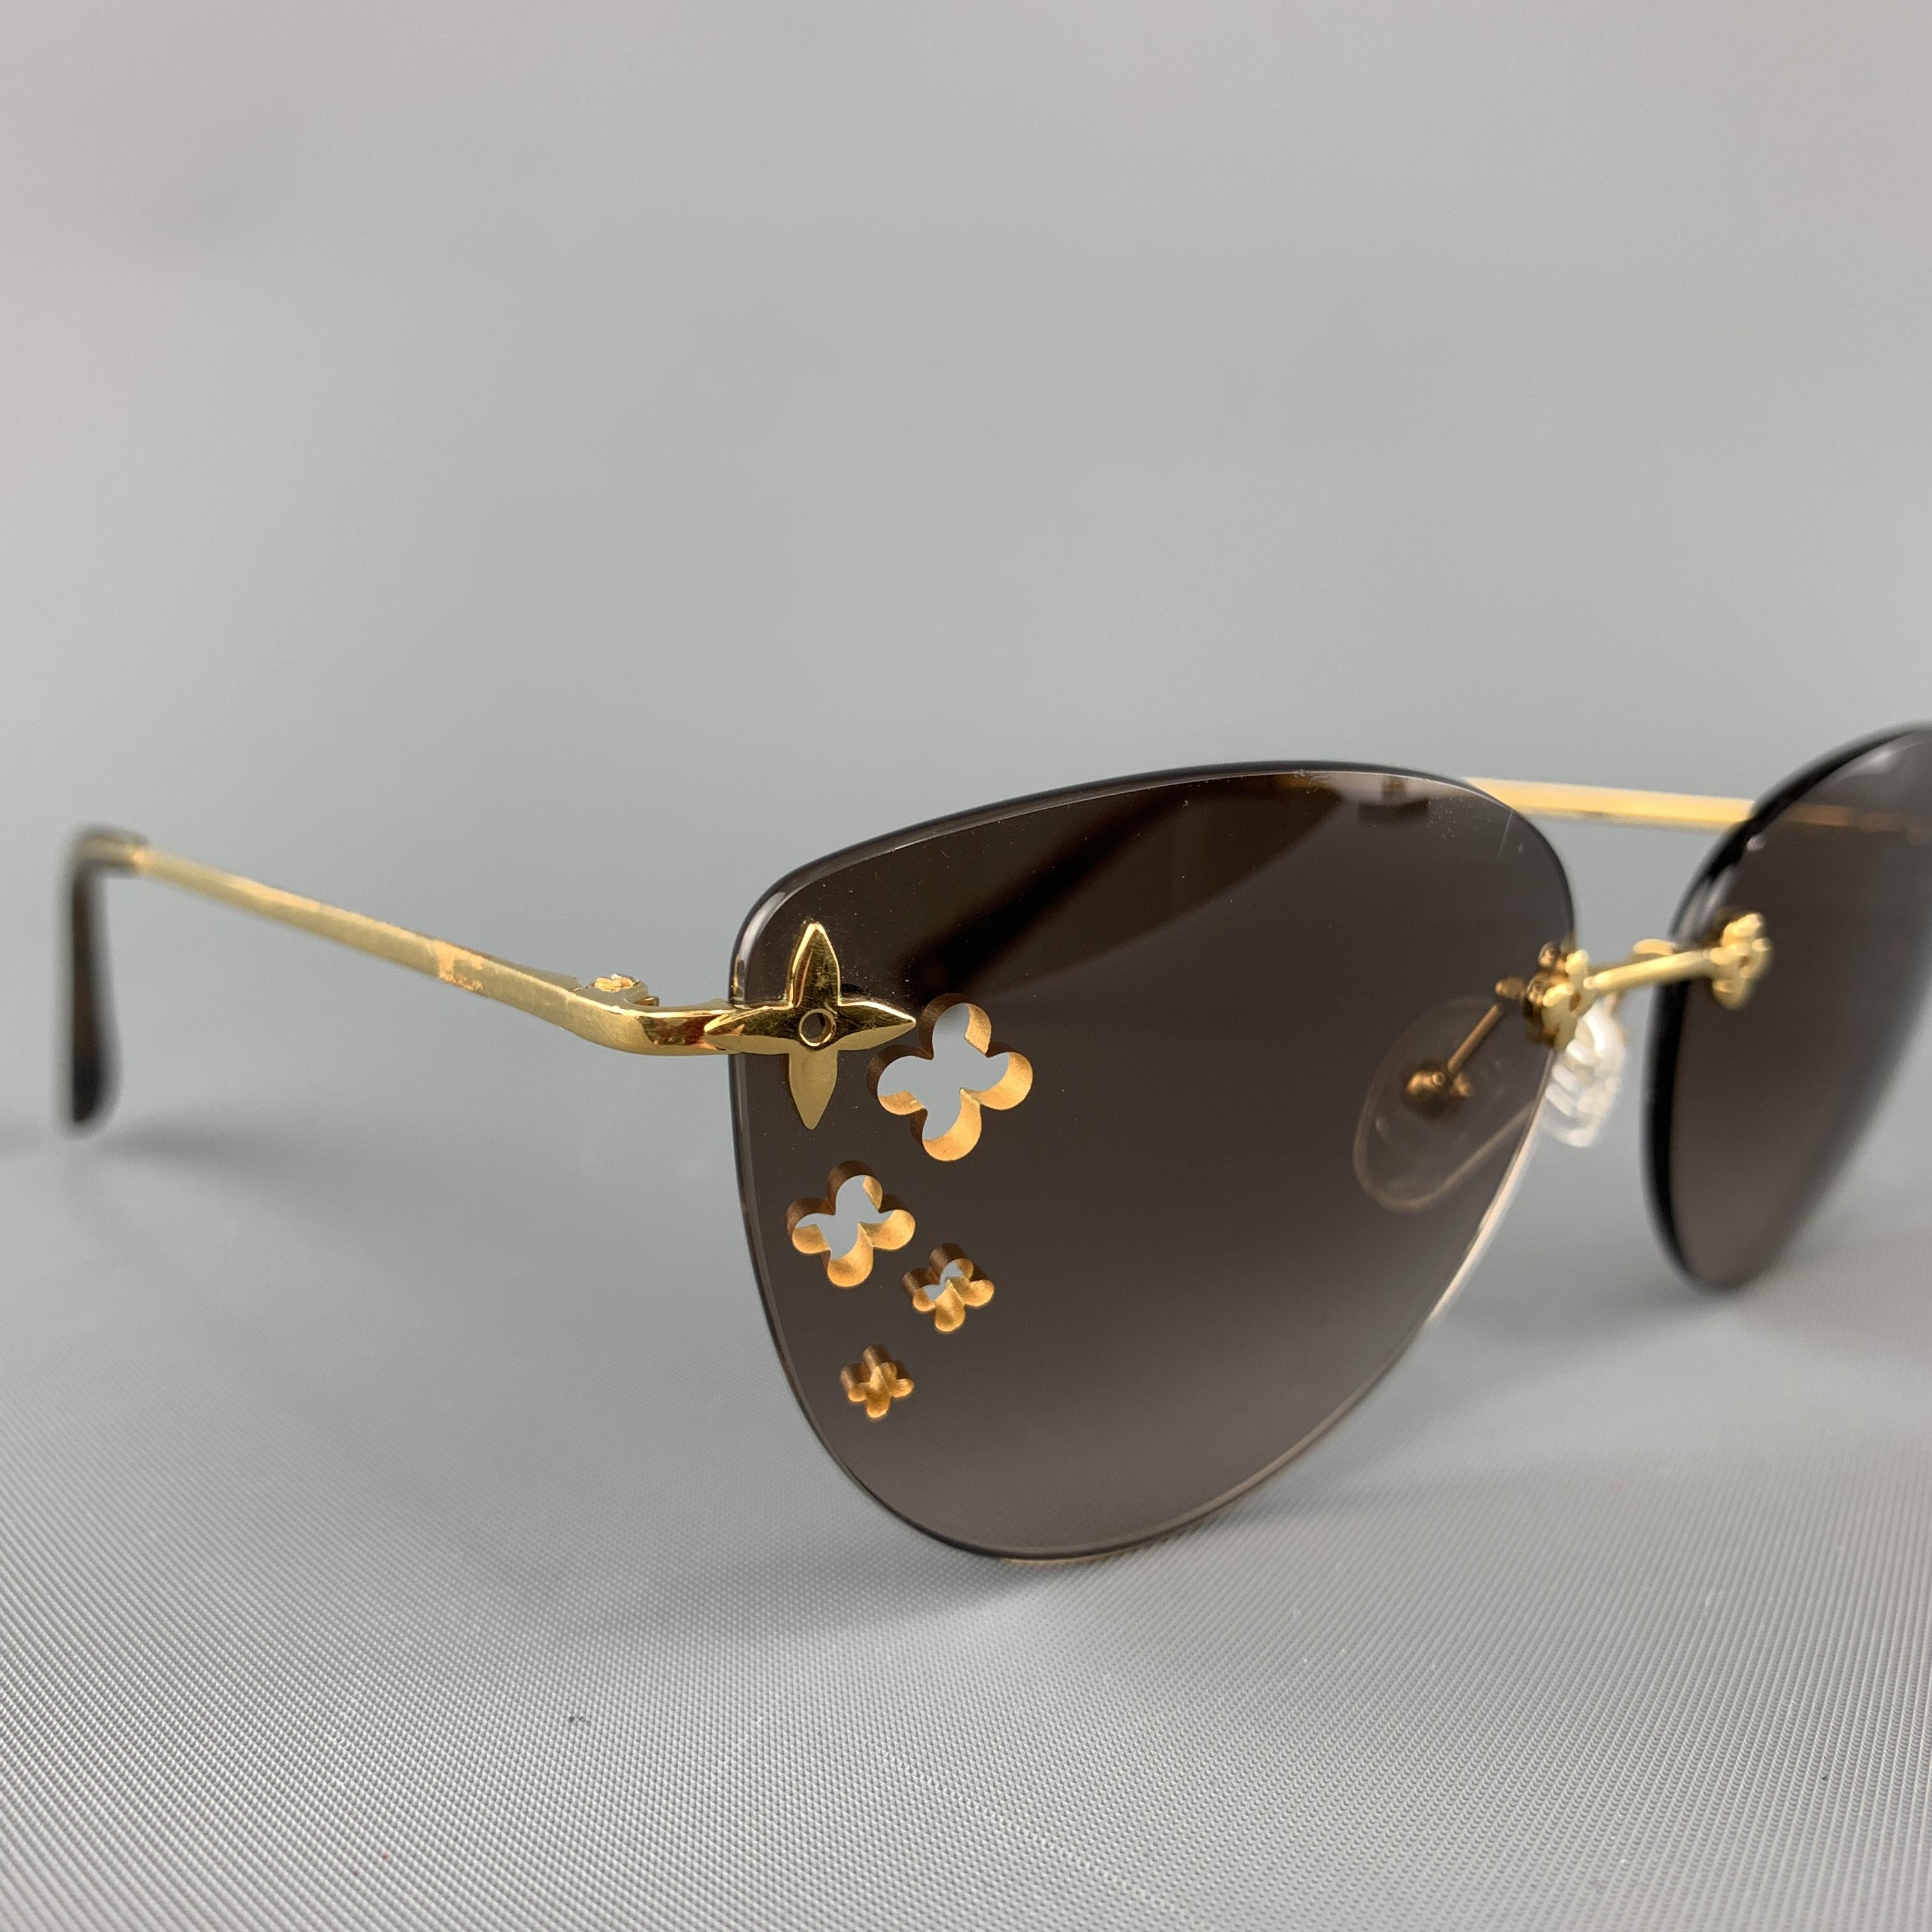 LOUIS VUITTON sunglasses feature brown ombre rimless lenses with flower cutouts and gold tone monogram charm hardware. Minor wear. Made in France.

Very Good Pre-Owned Condition.
Marked: Z0051U 

Length: 14 cm.
Width: 5 cm.